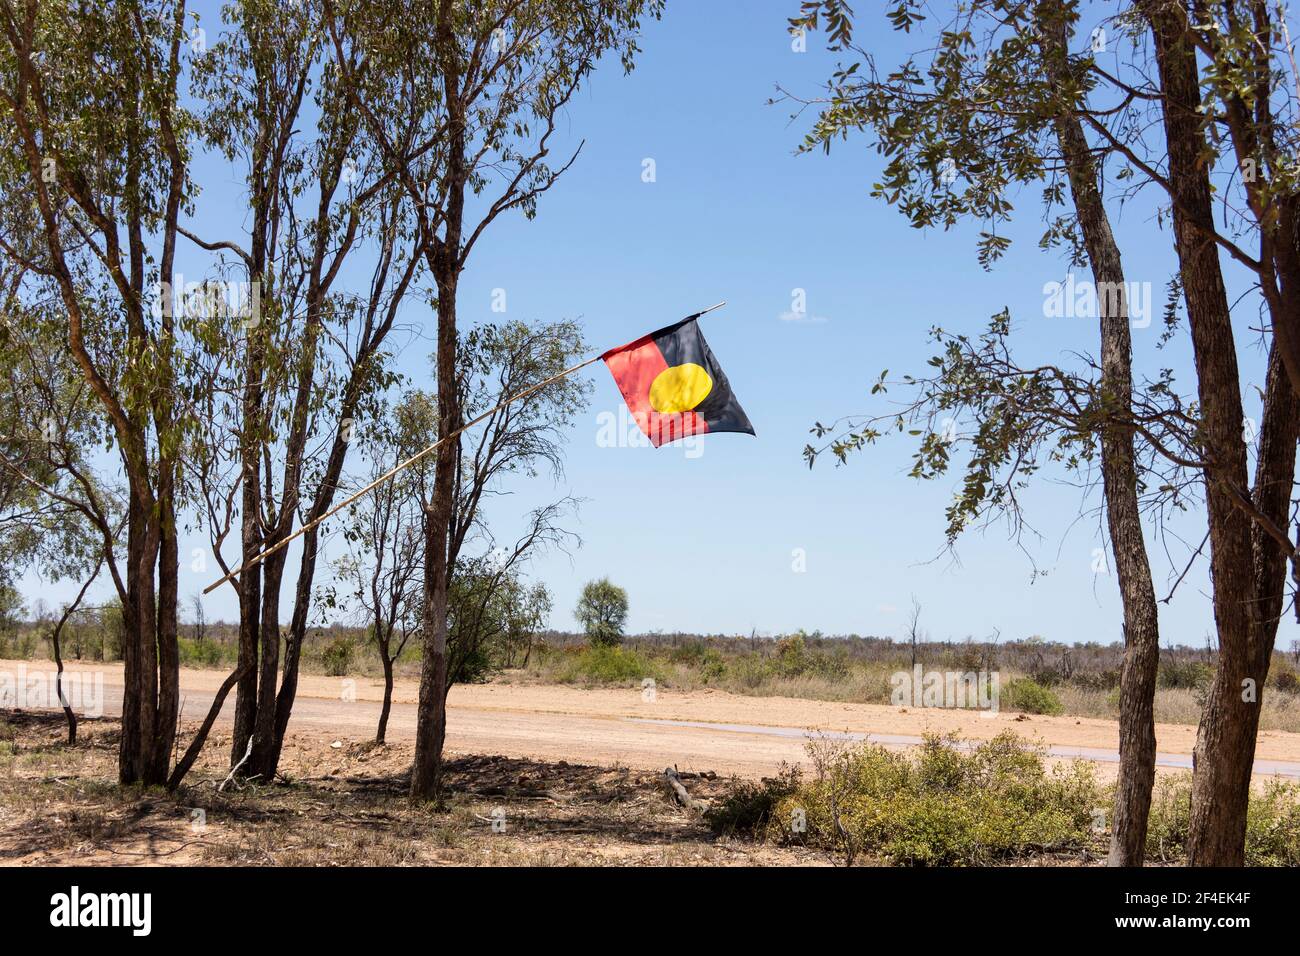 An Australian Aboriginal flag flown in protest against mining at the Adani Bravus Carmichael mine site in the Gallillee Basin, Central Queensland. Stock Photo